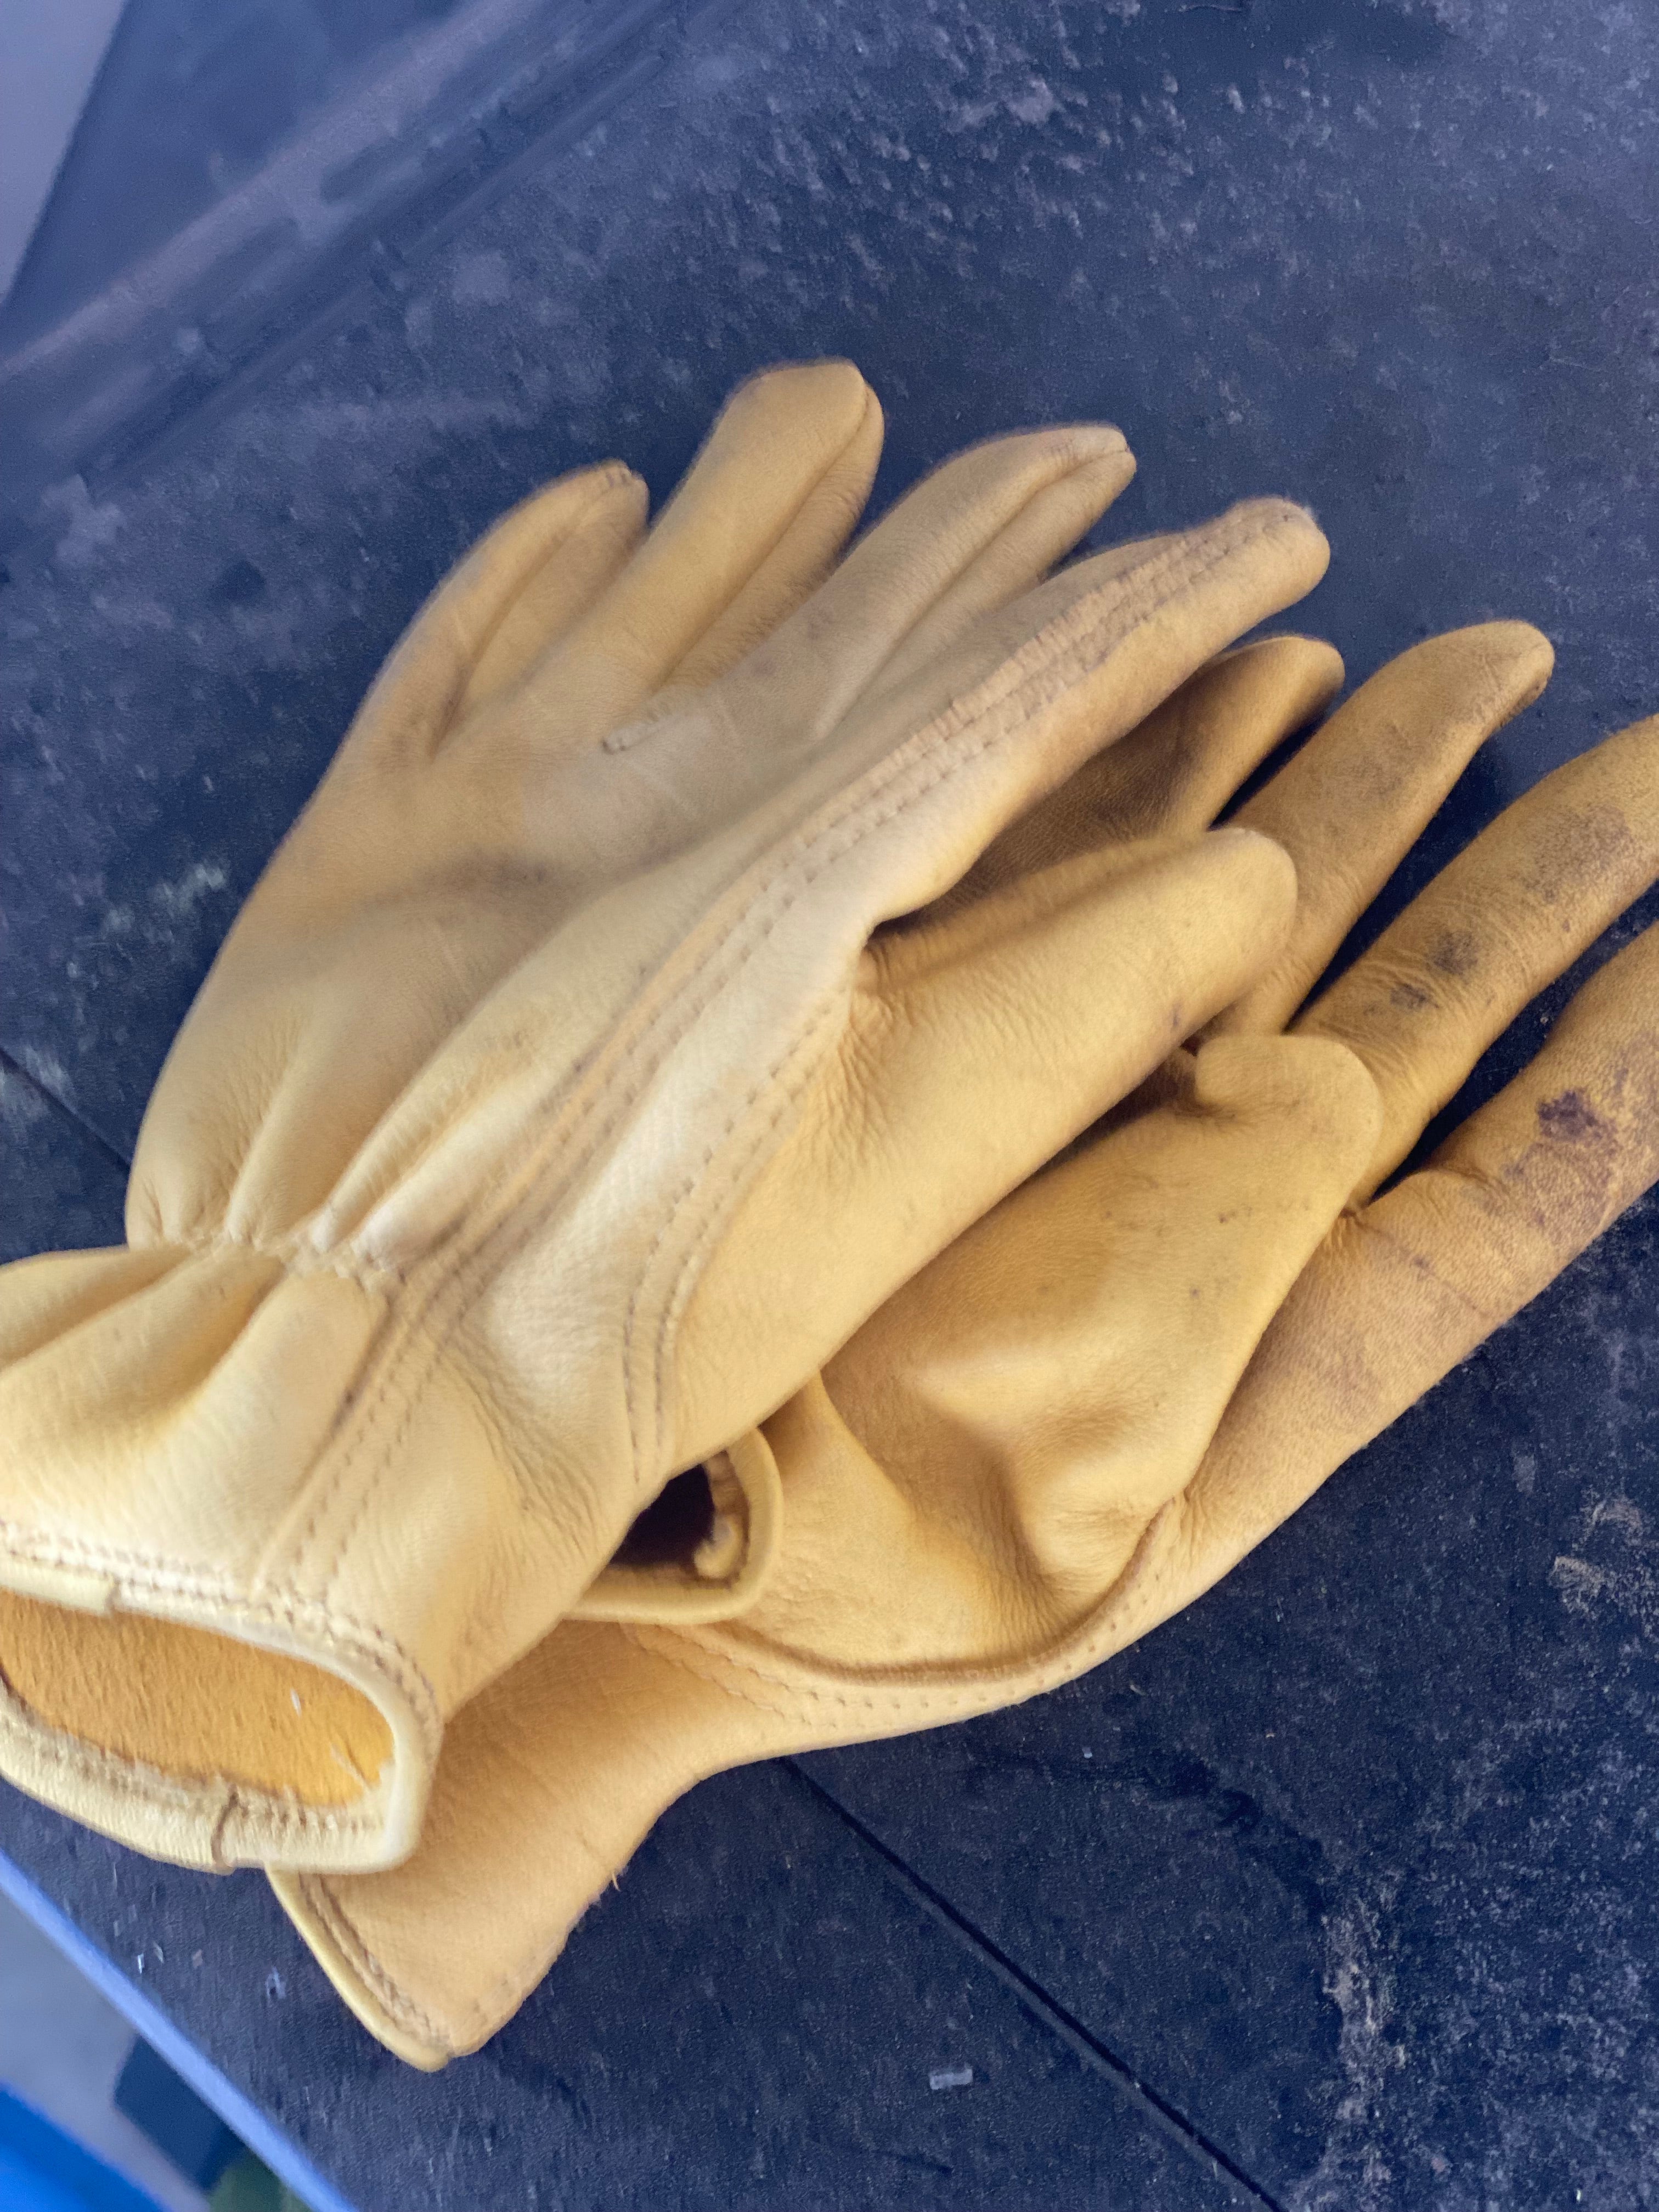 http://shopgoldenstagglove.com/cdn/shop/articles/How-To-Clean-Leather-Work-Gloves-Golden-Stag-Gloves-4684.jpg?v=1691899994